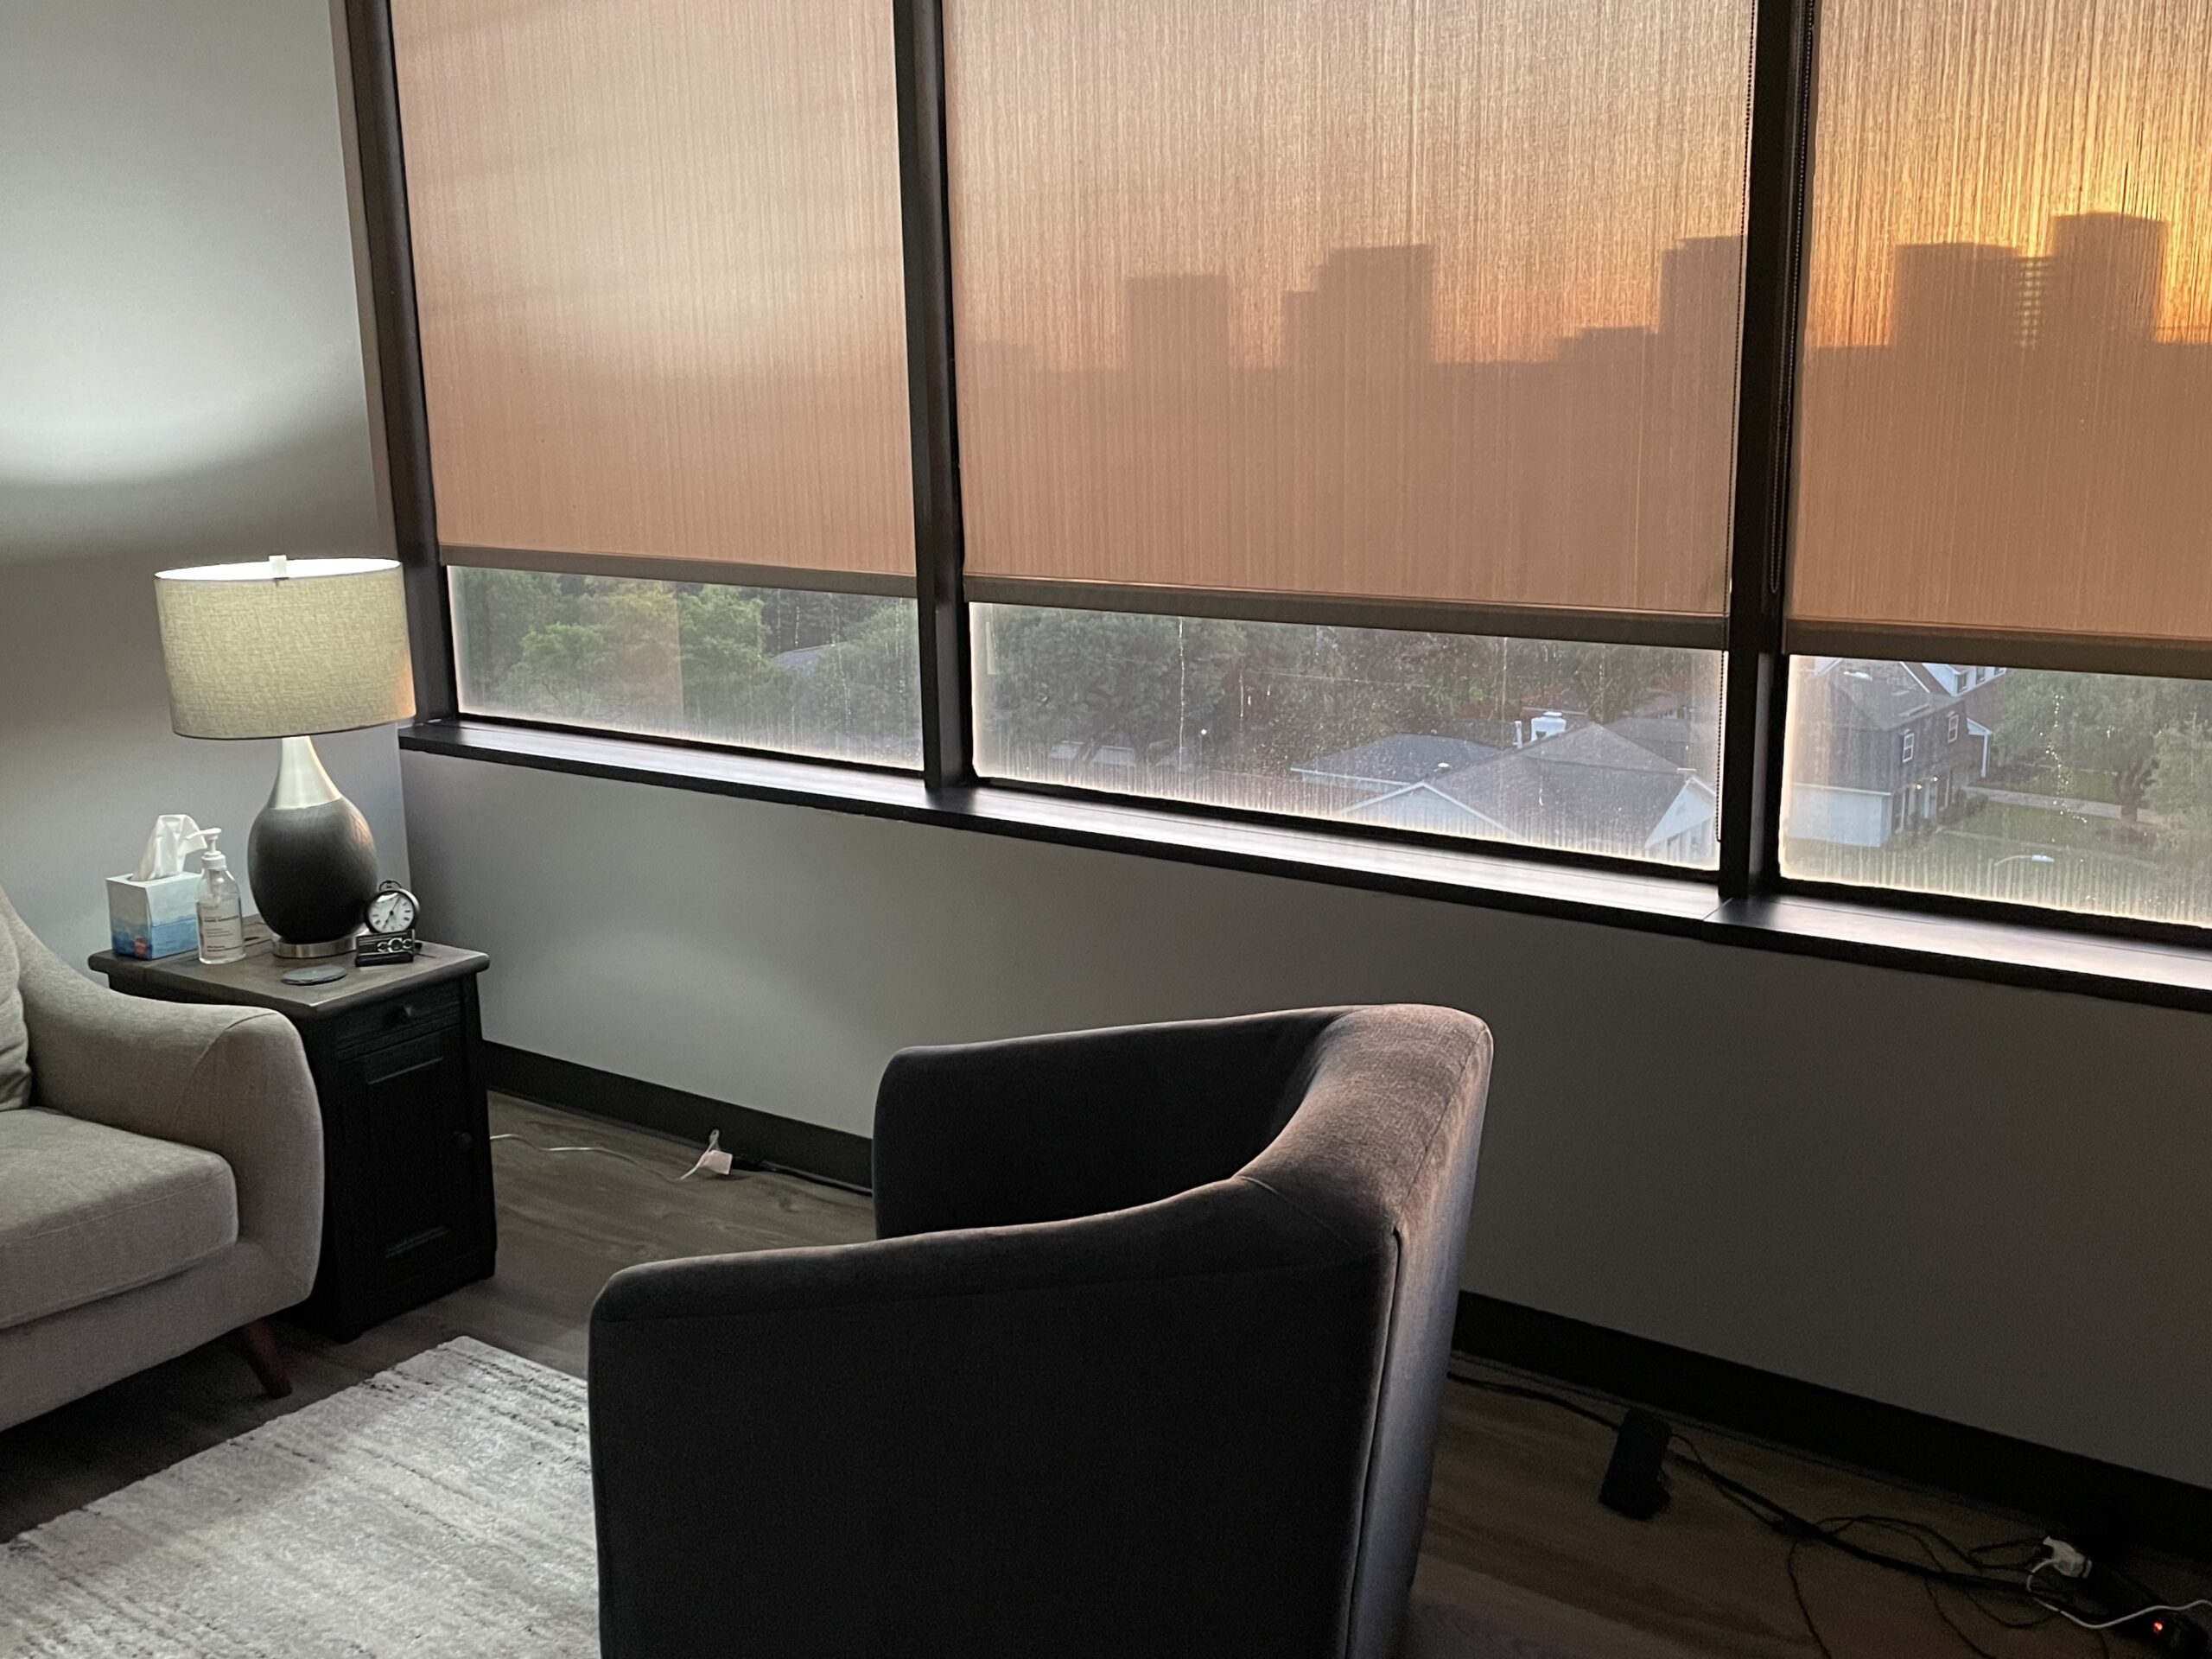 A room with a chair and a window overlooking a city